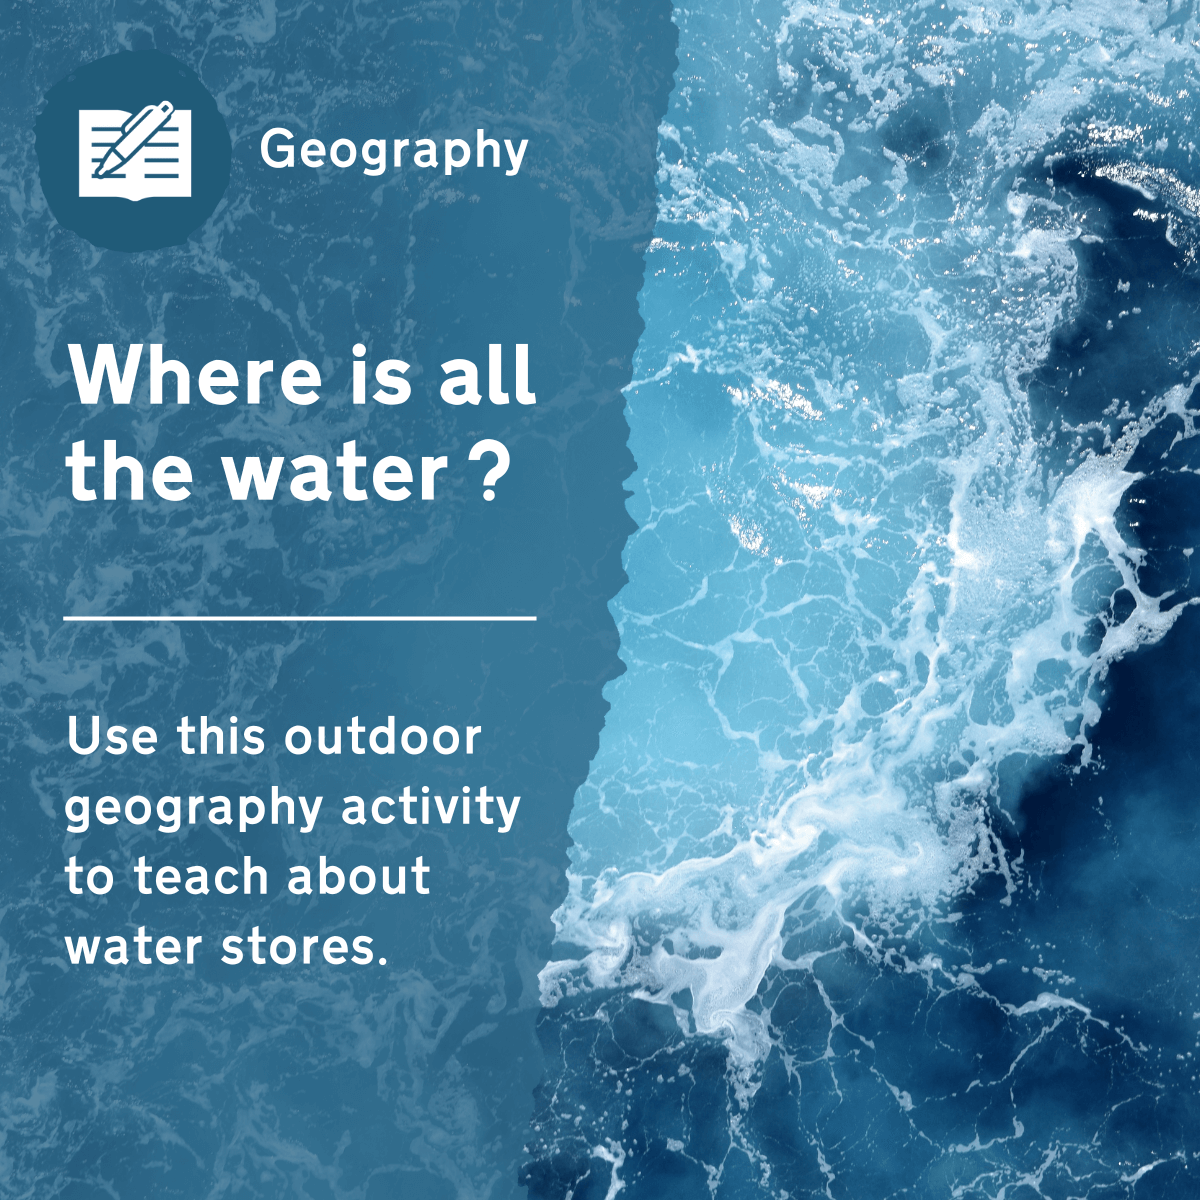 Use this secondary geography activity to demonstrate the finite nature of Earth's water stores. This outdoor lesson idea will allow for discussion about the locations of water on our planet and the impacts of water scarcity on nature and humans.